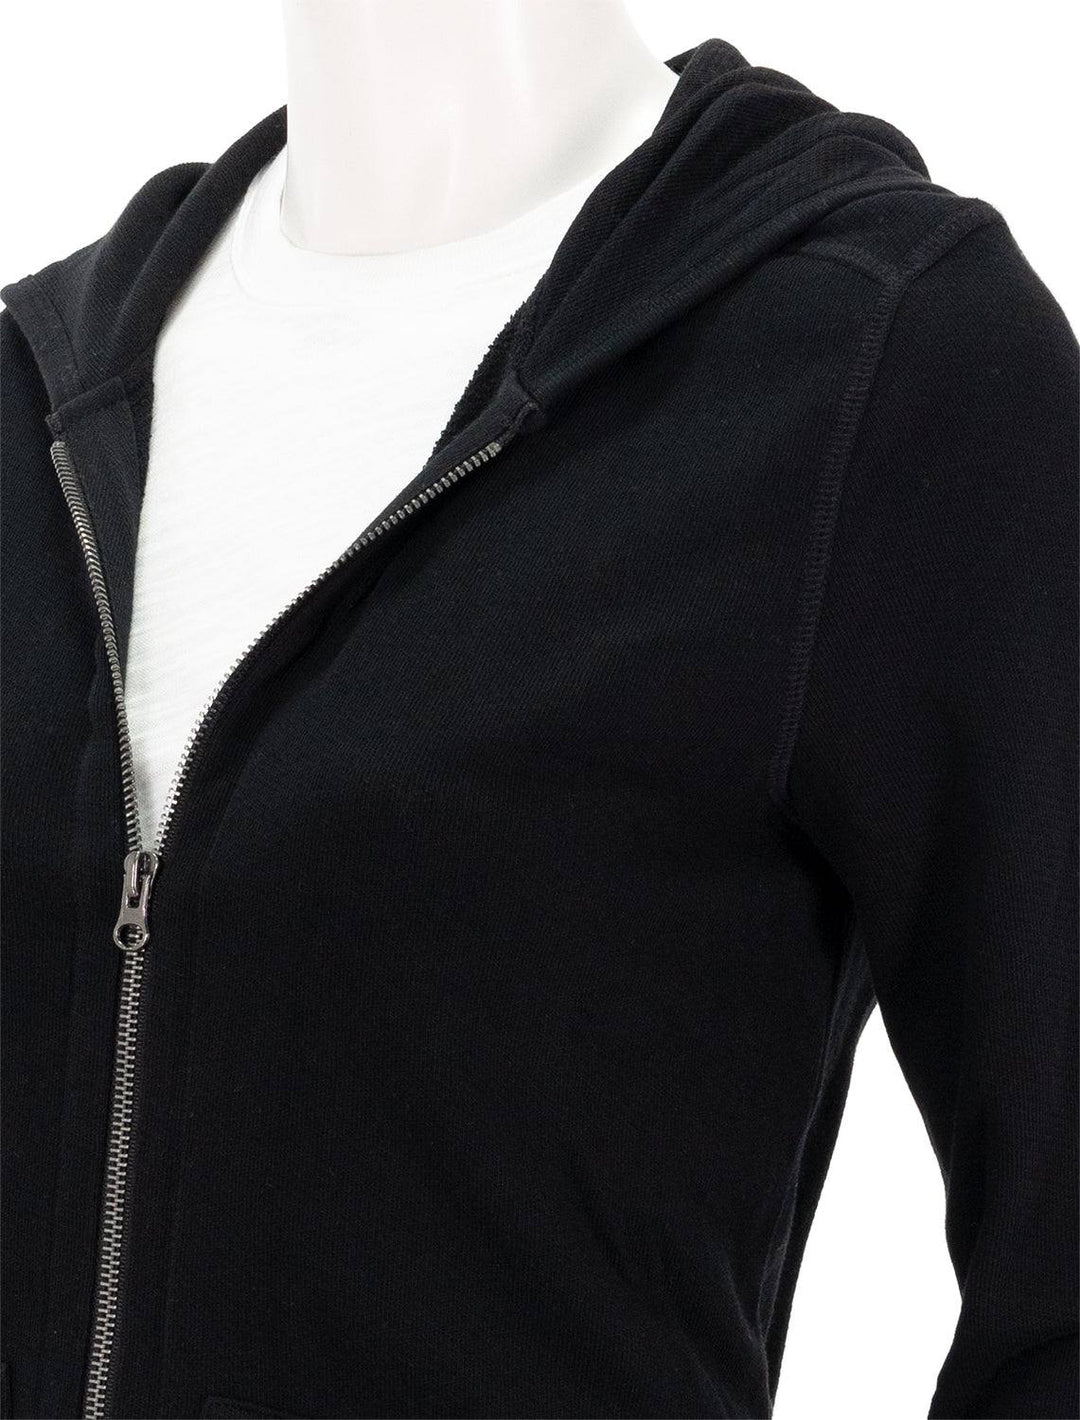 ATM french terry zip-up hoodie in black - Twigs